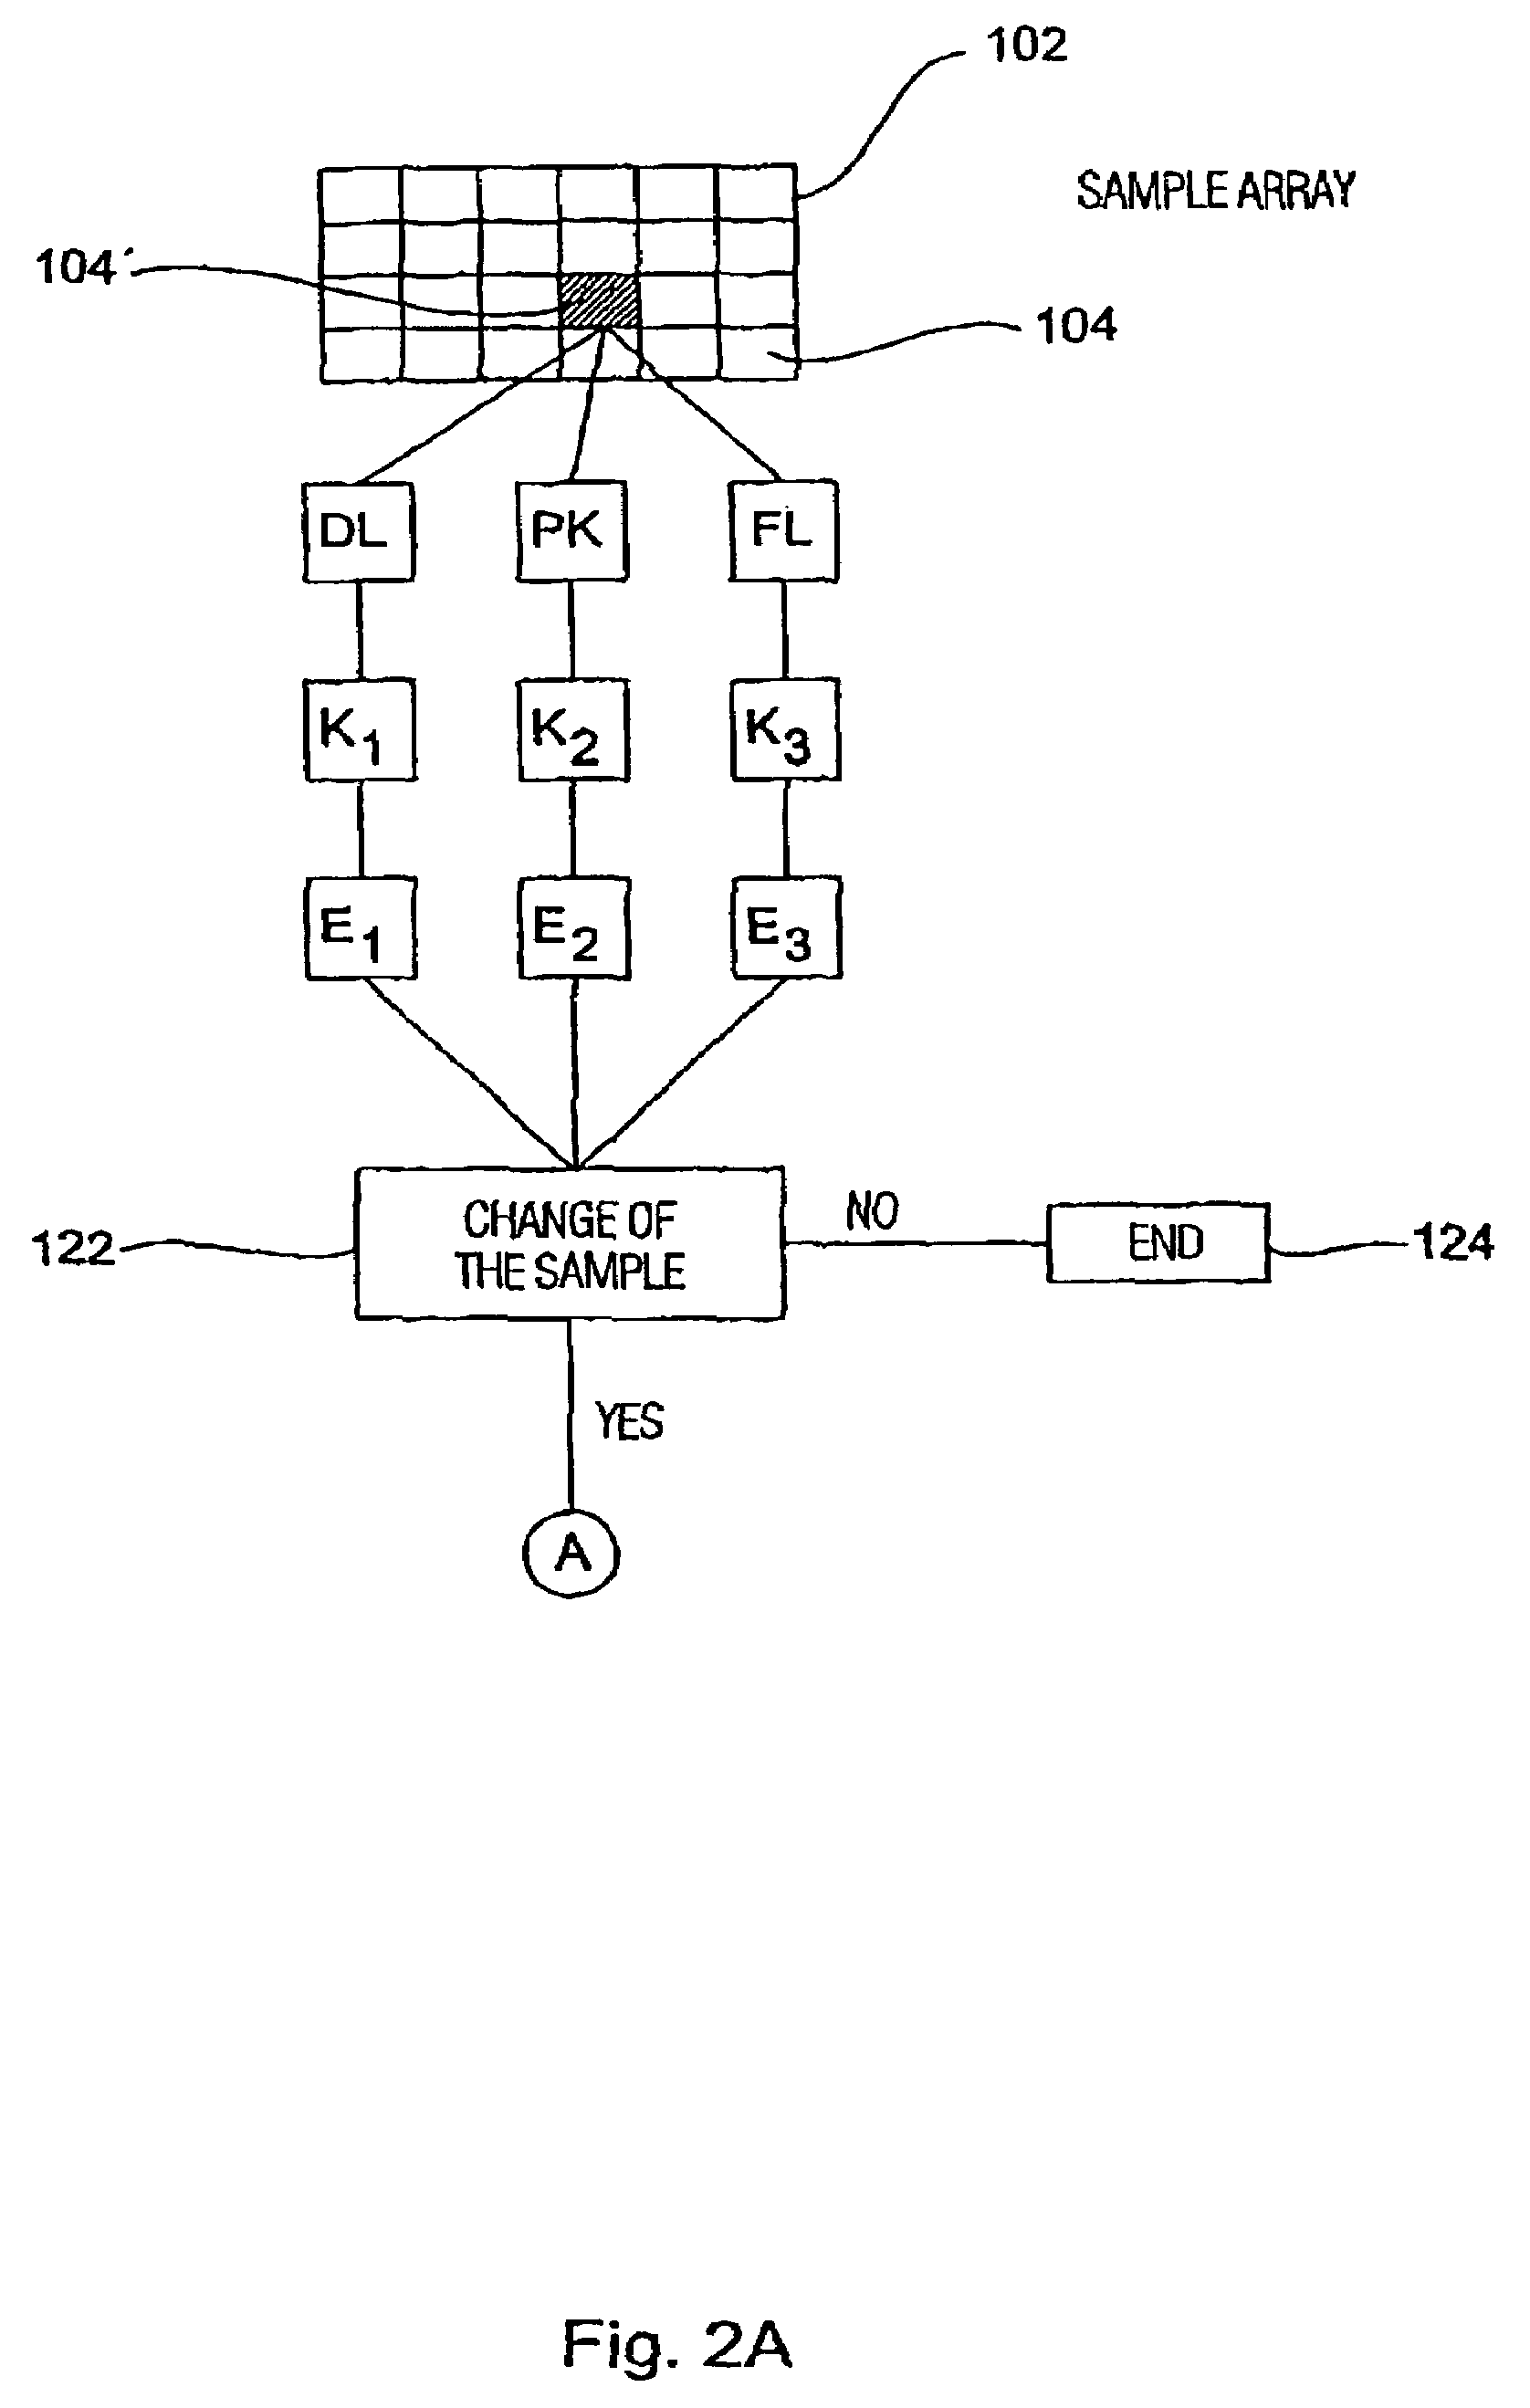 Method for analyzing a biological sample